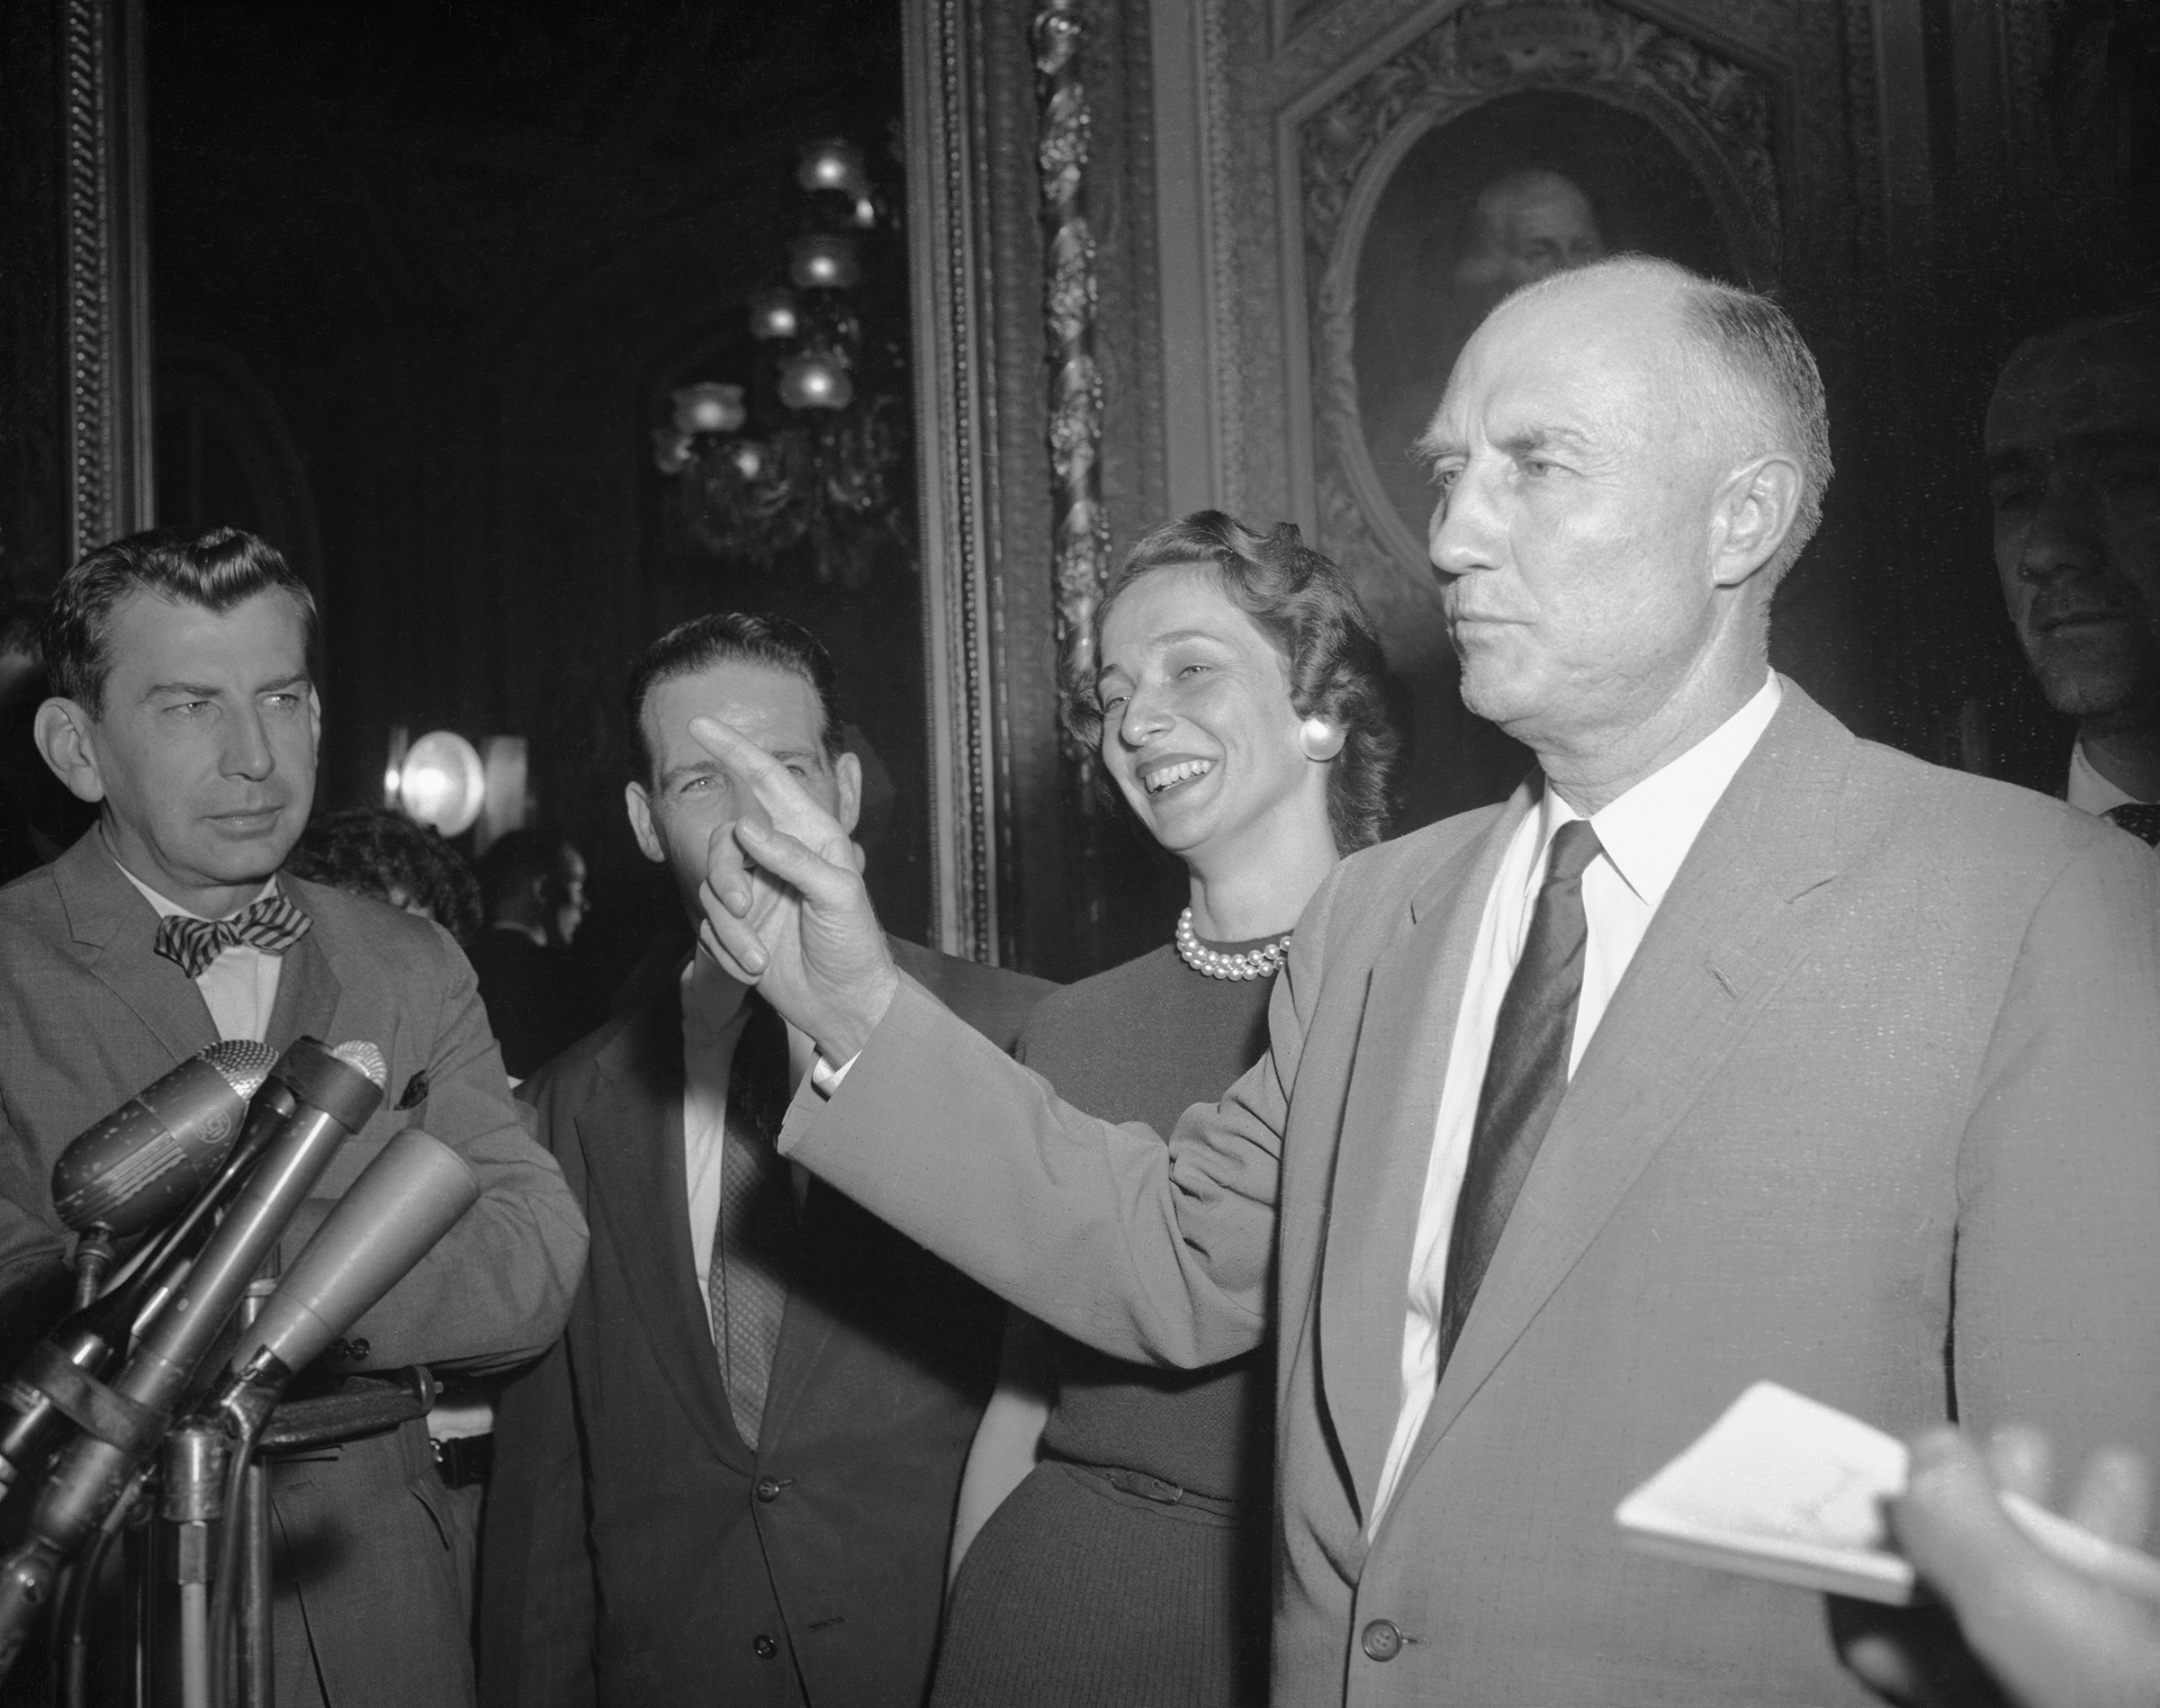 Sen. Strom Thurmond speaks with reporters after ending the longest filibuster on record — a 24-hour, 18-minute talkathon against the Civil Rights Act of 1957 in the Senate Chamber — Washington, D.C. on Aug. 29, 1957. (Bettmann Archive/Getty Images)